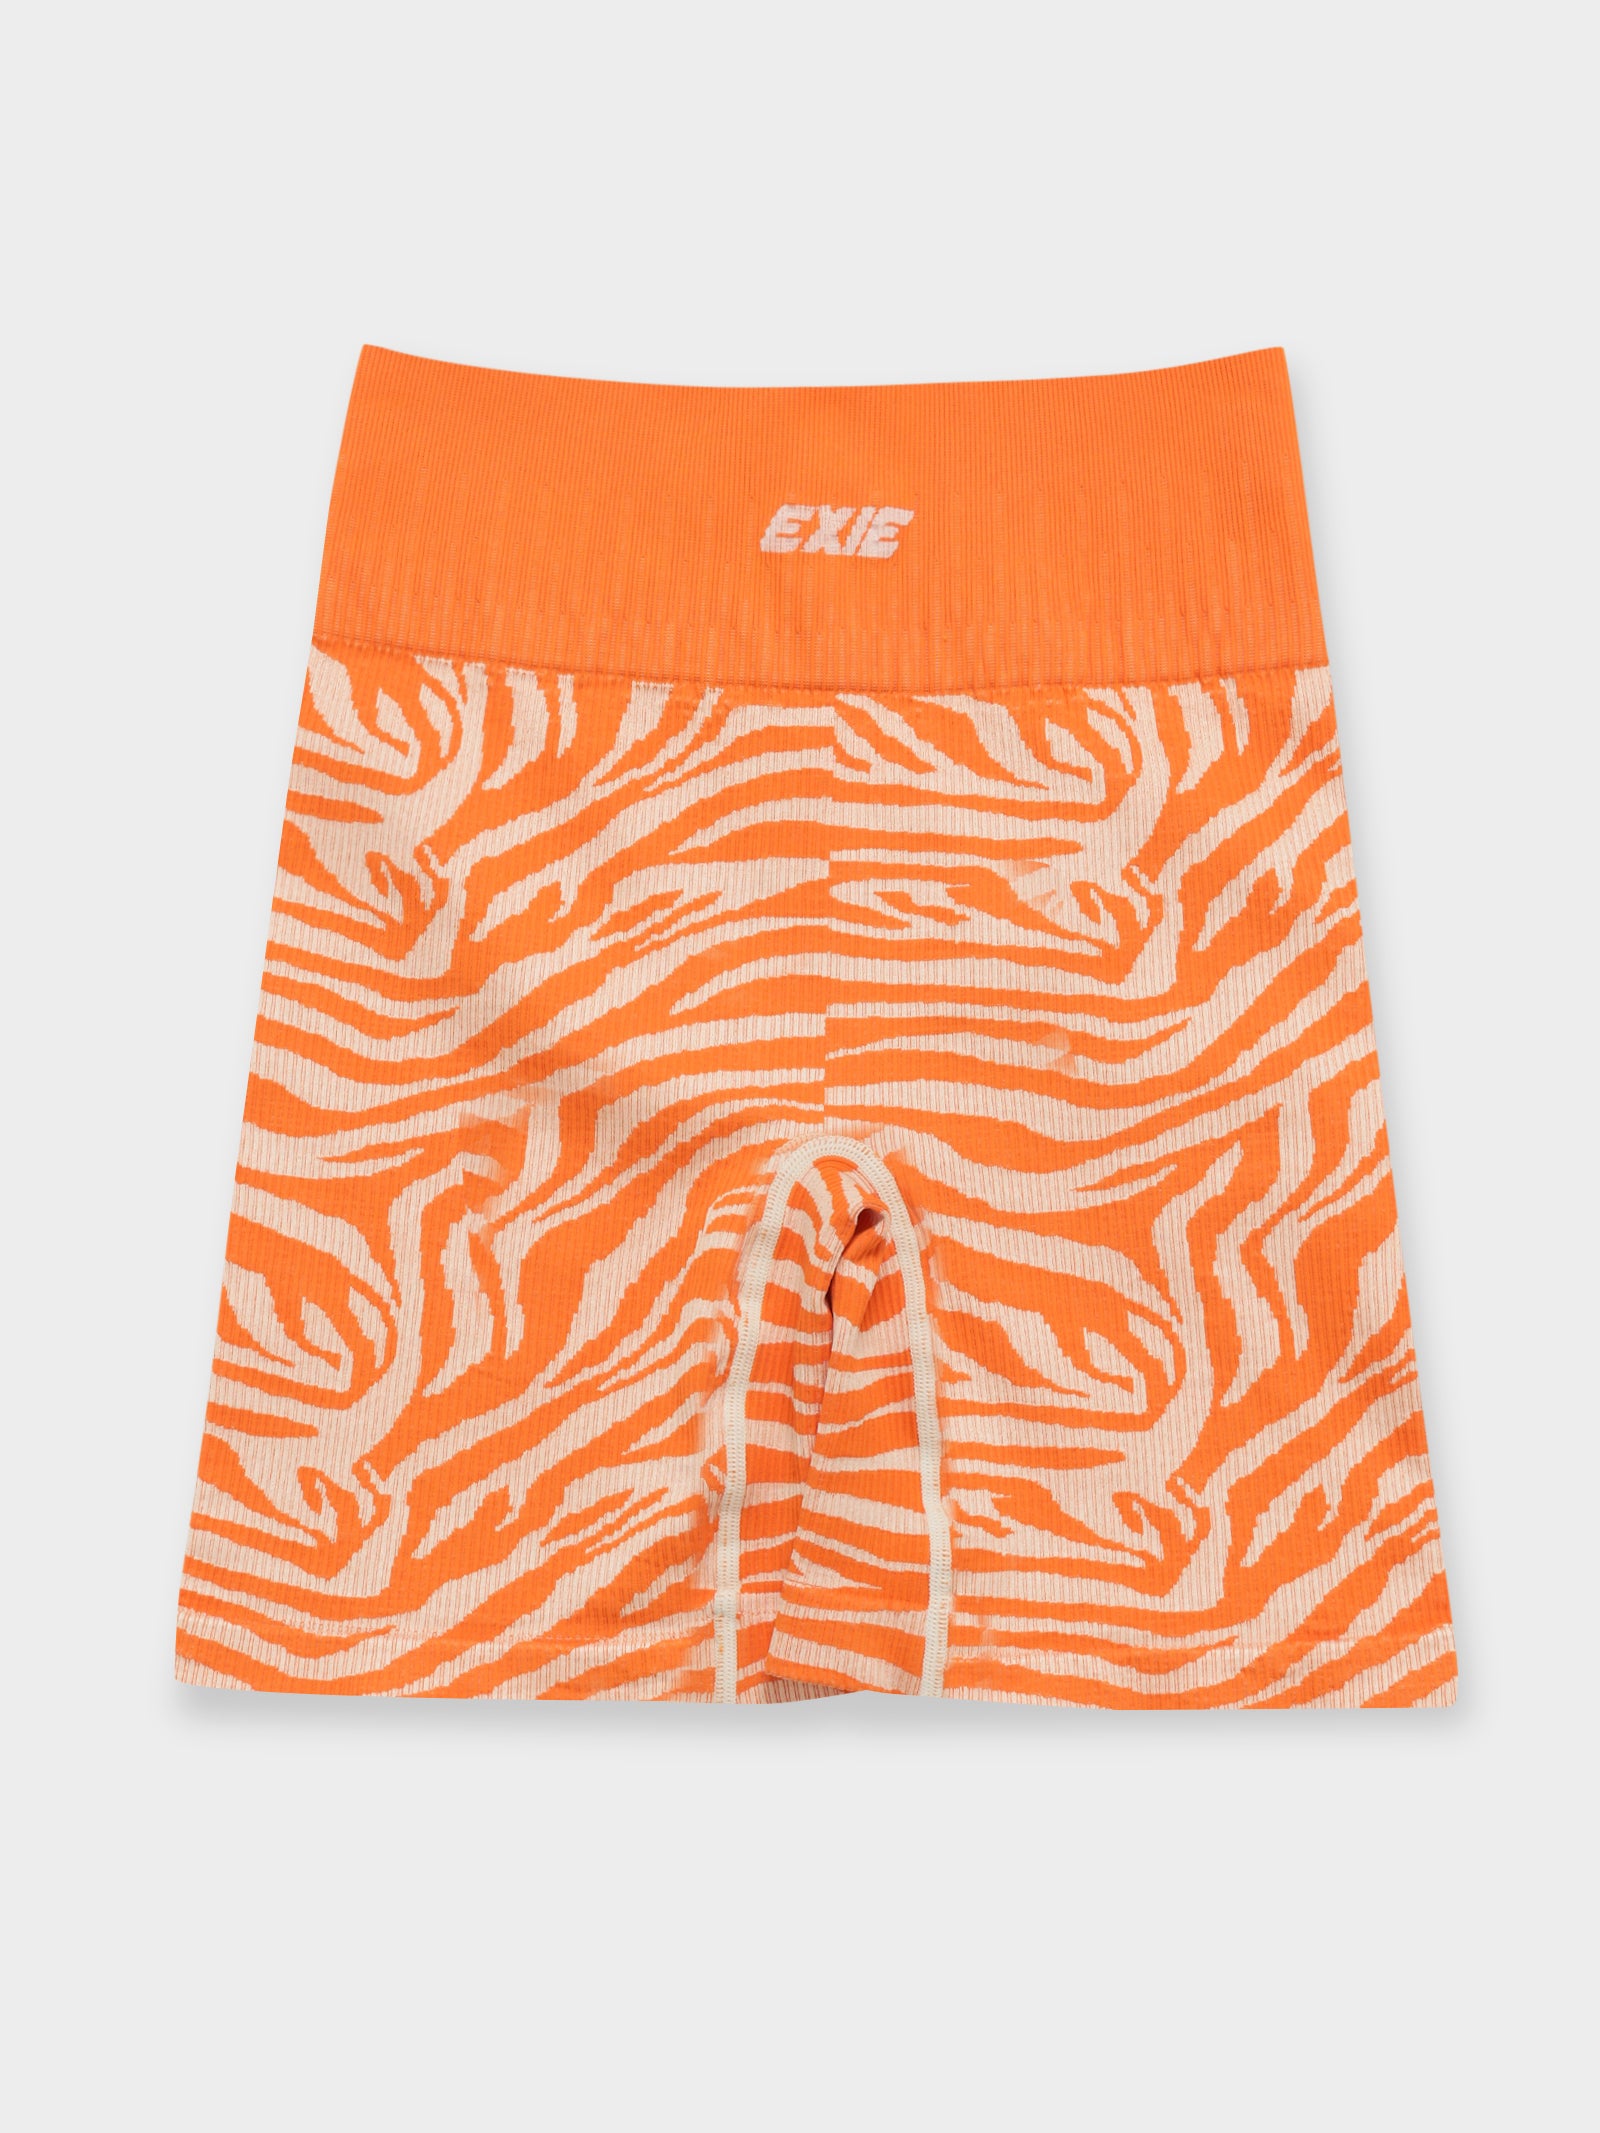 Duality Shorts in Apricot Tribal